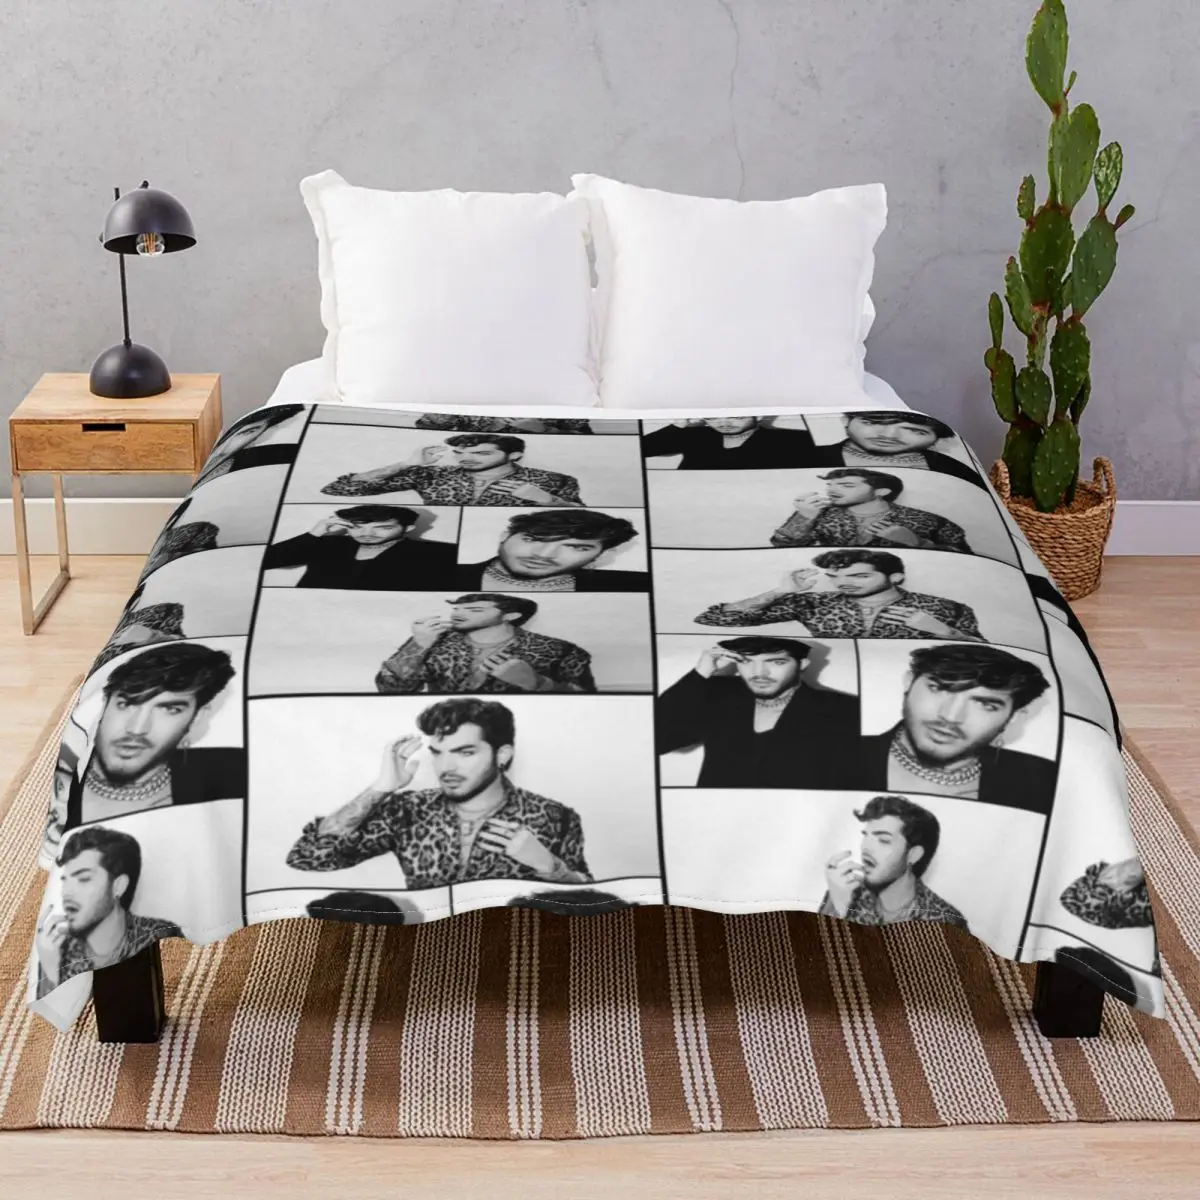 Stunning Adam Lambert Blanket Flannel Plush Print Fluffy Unisex Throw Blankets for Bed Home Couch Camp Cinema